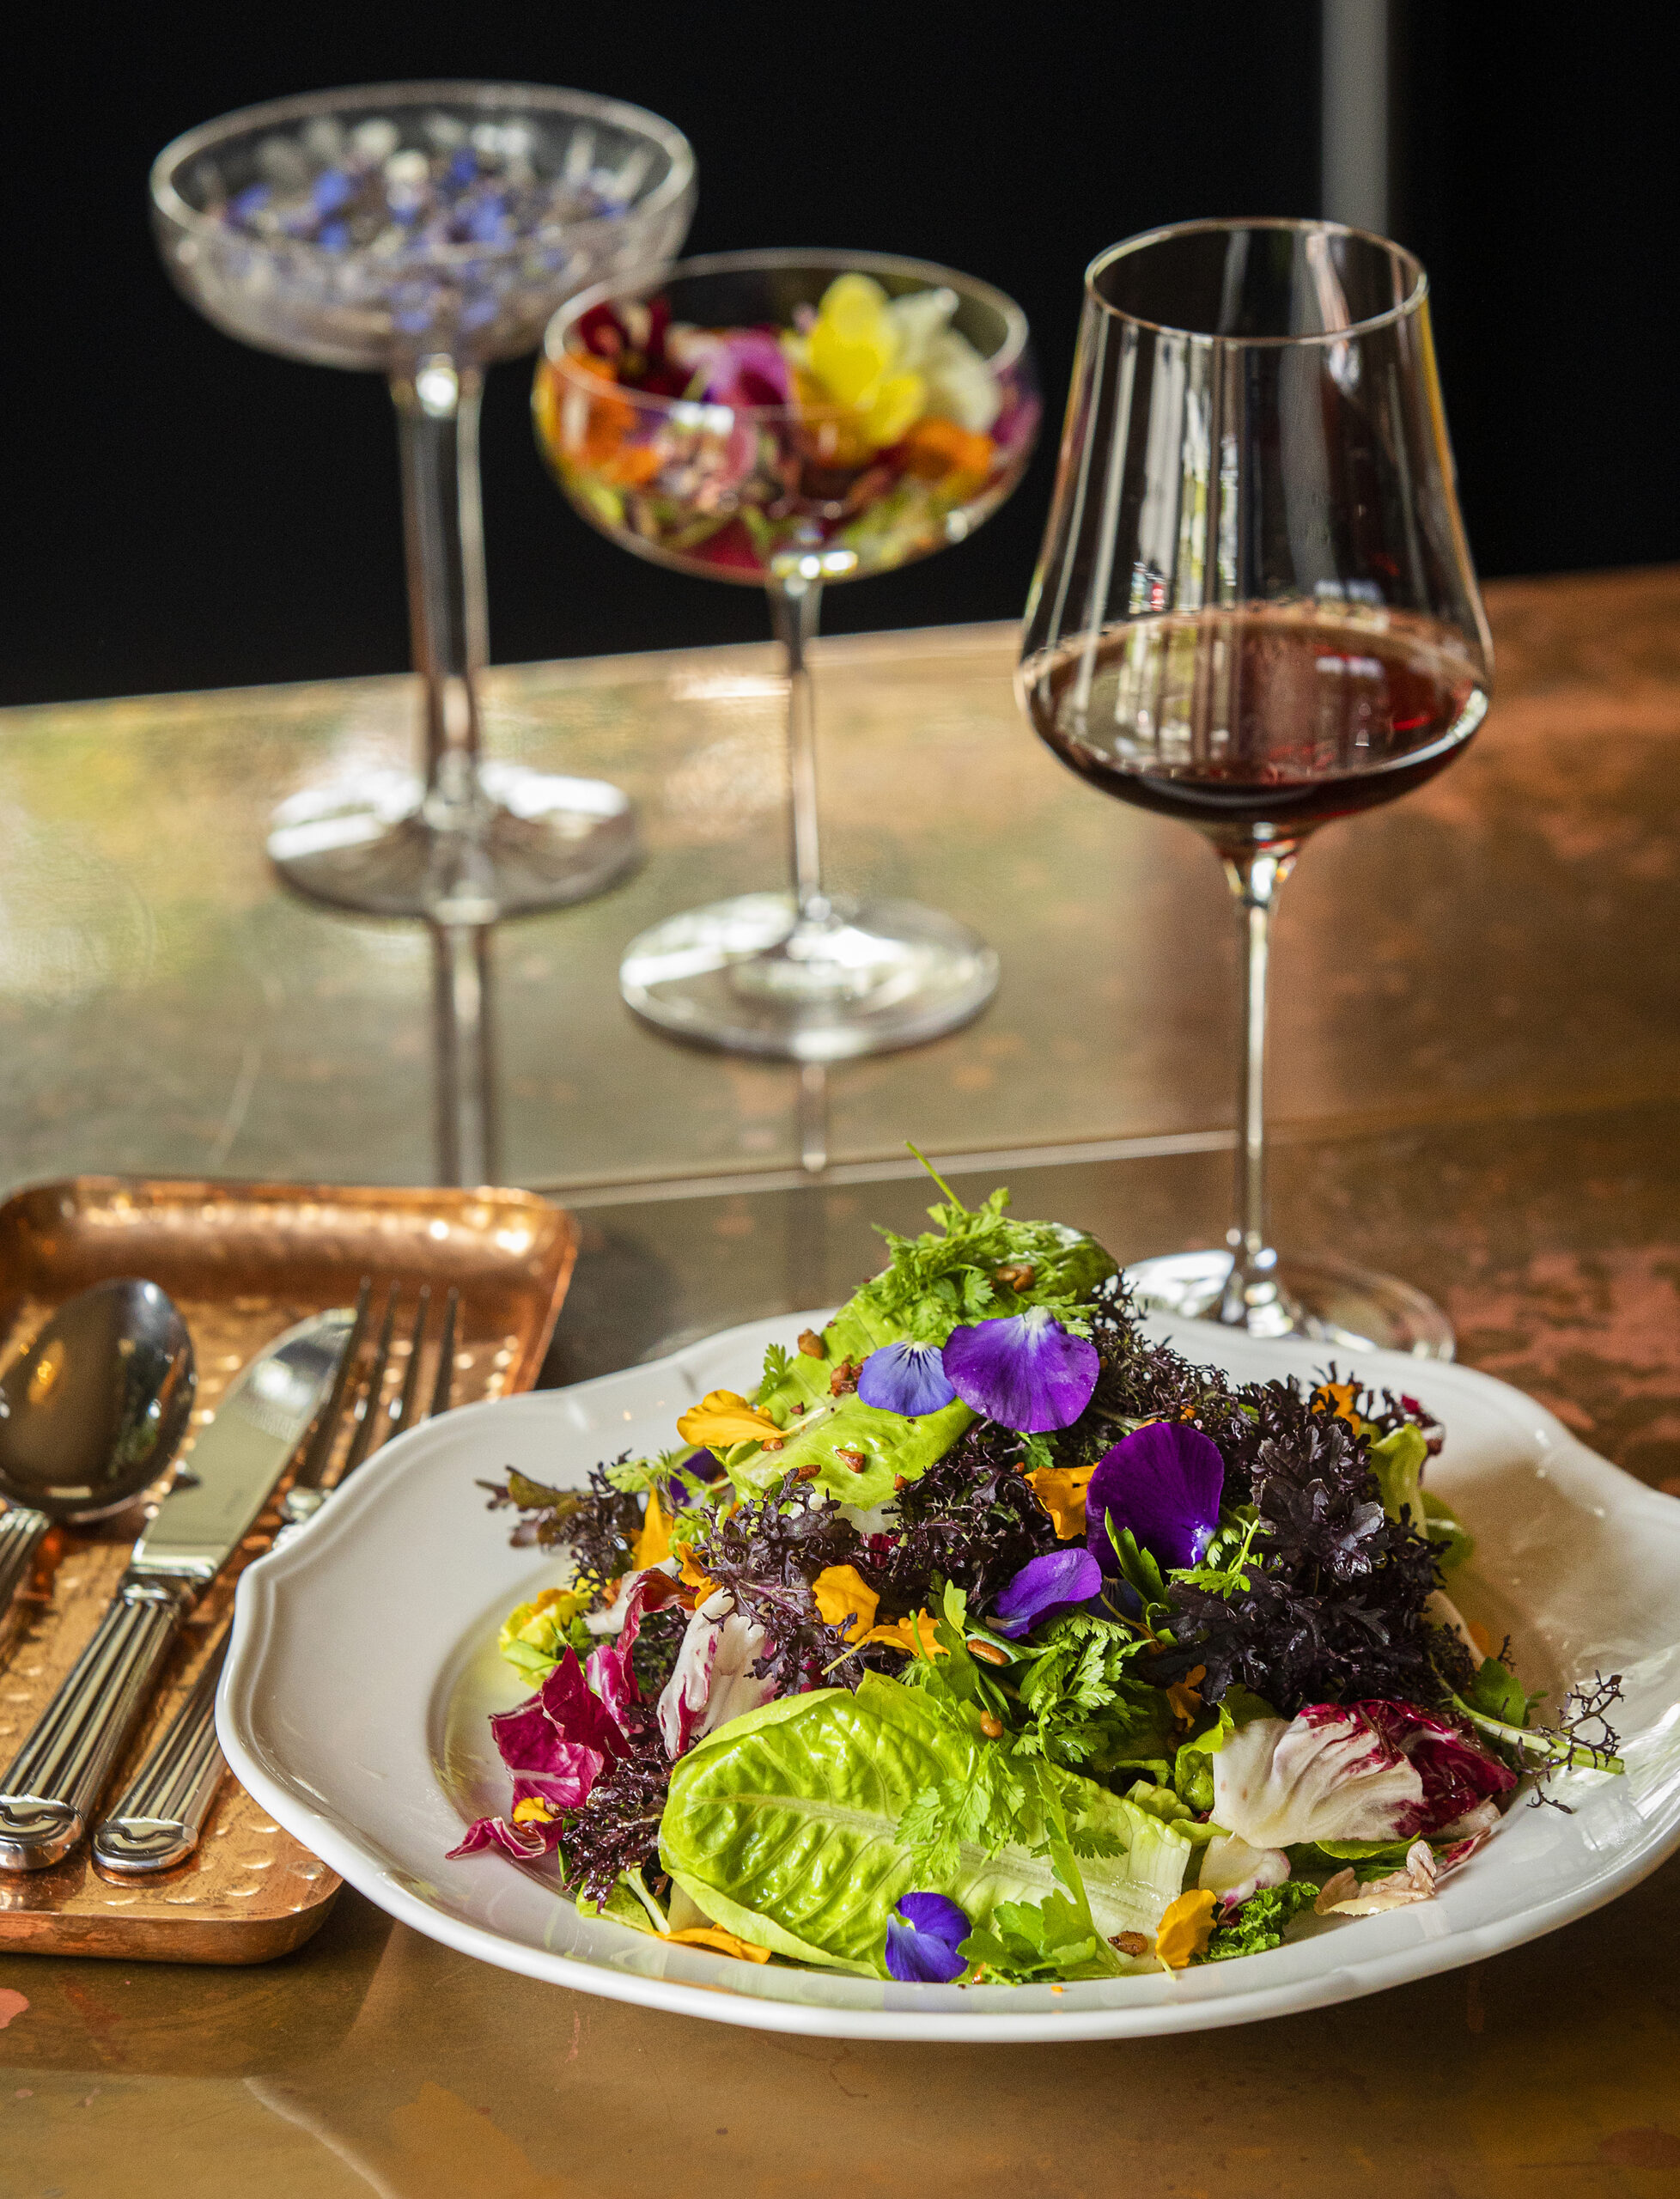 The Madrona Salad with lettuces, fresh And pickled estate vegetables and herb Dressing from The Madrona in Healdsburg Friday, June 3, 2022. (John Burgess / The Press Democrat)